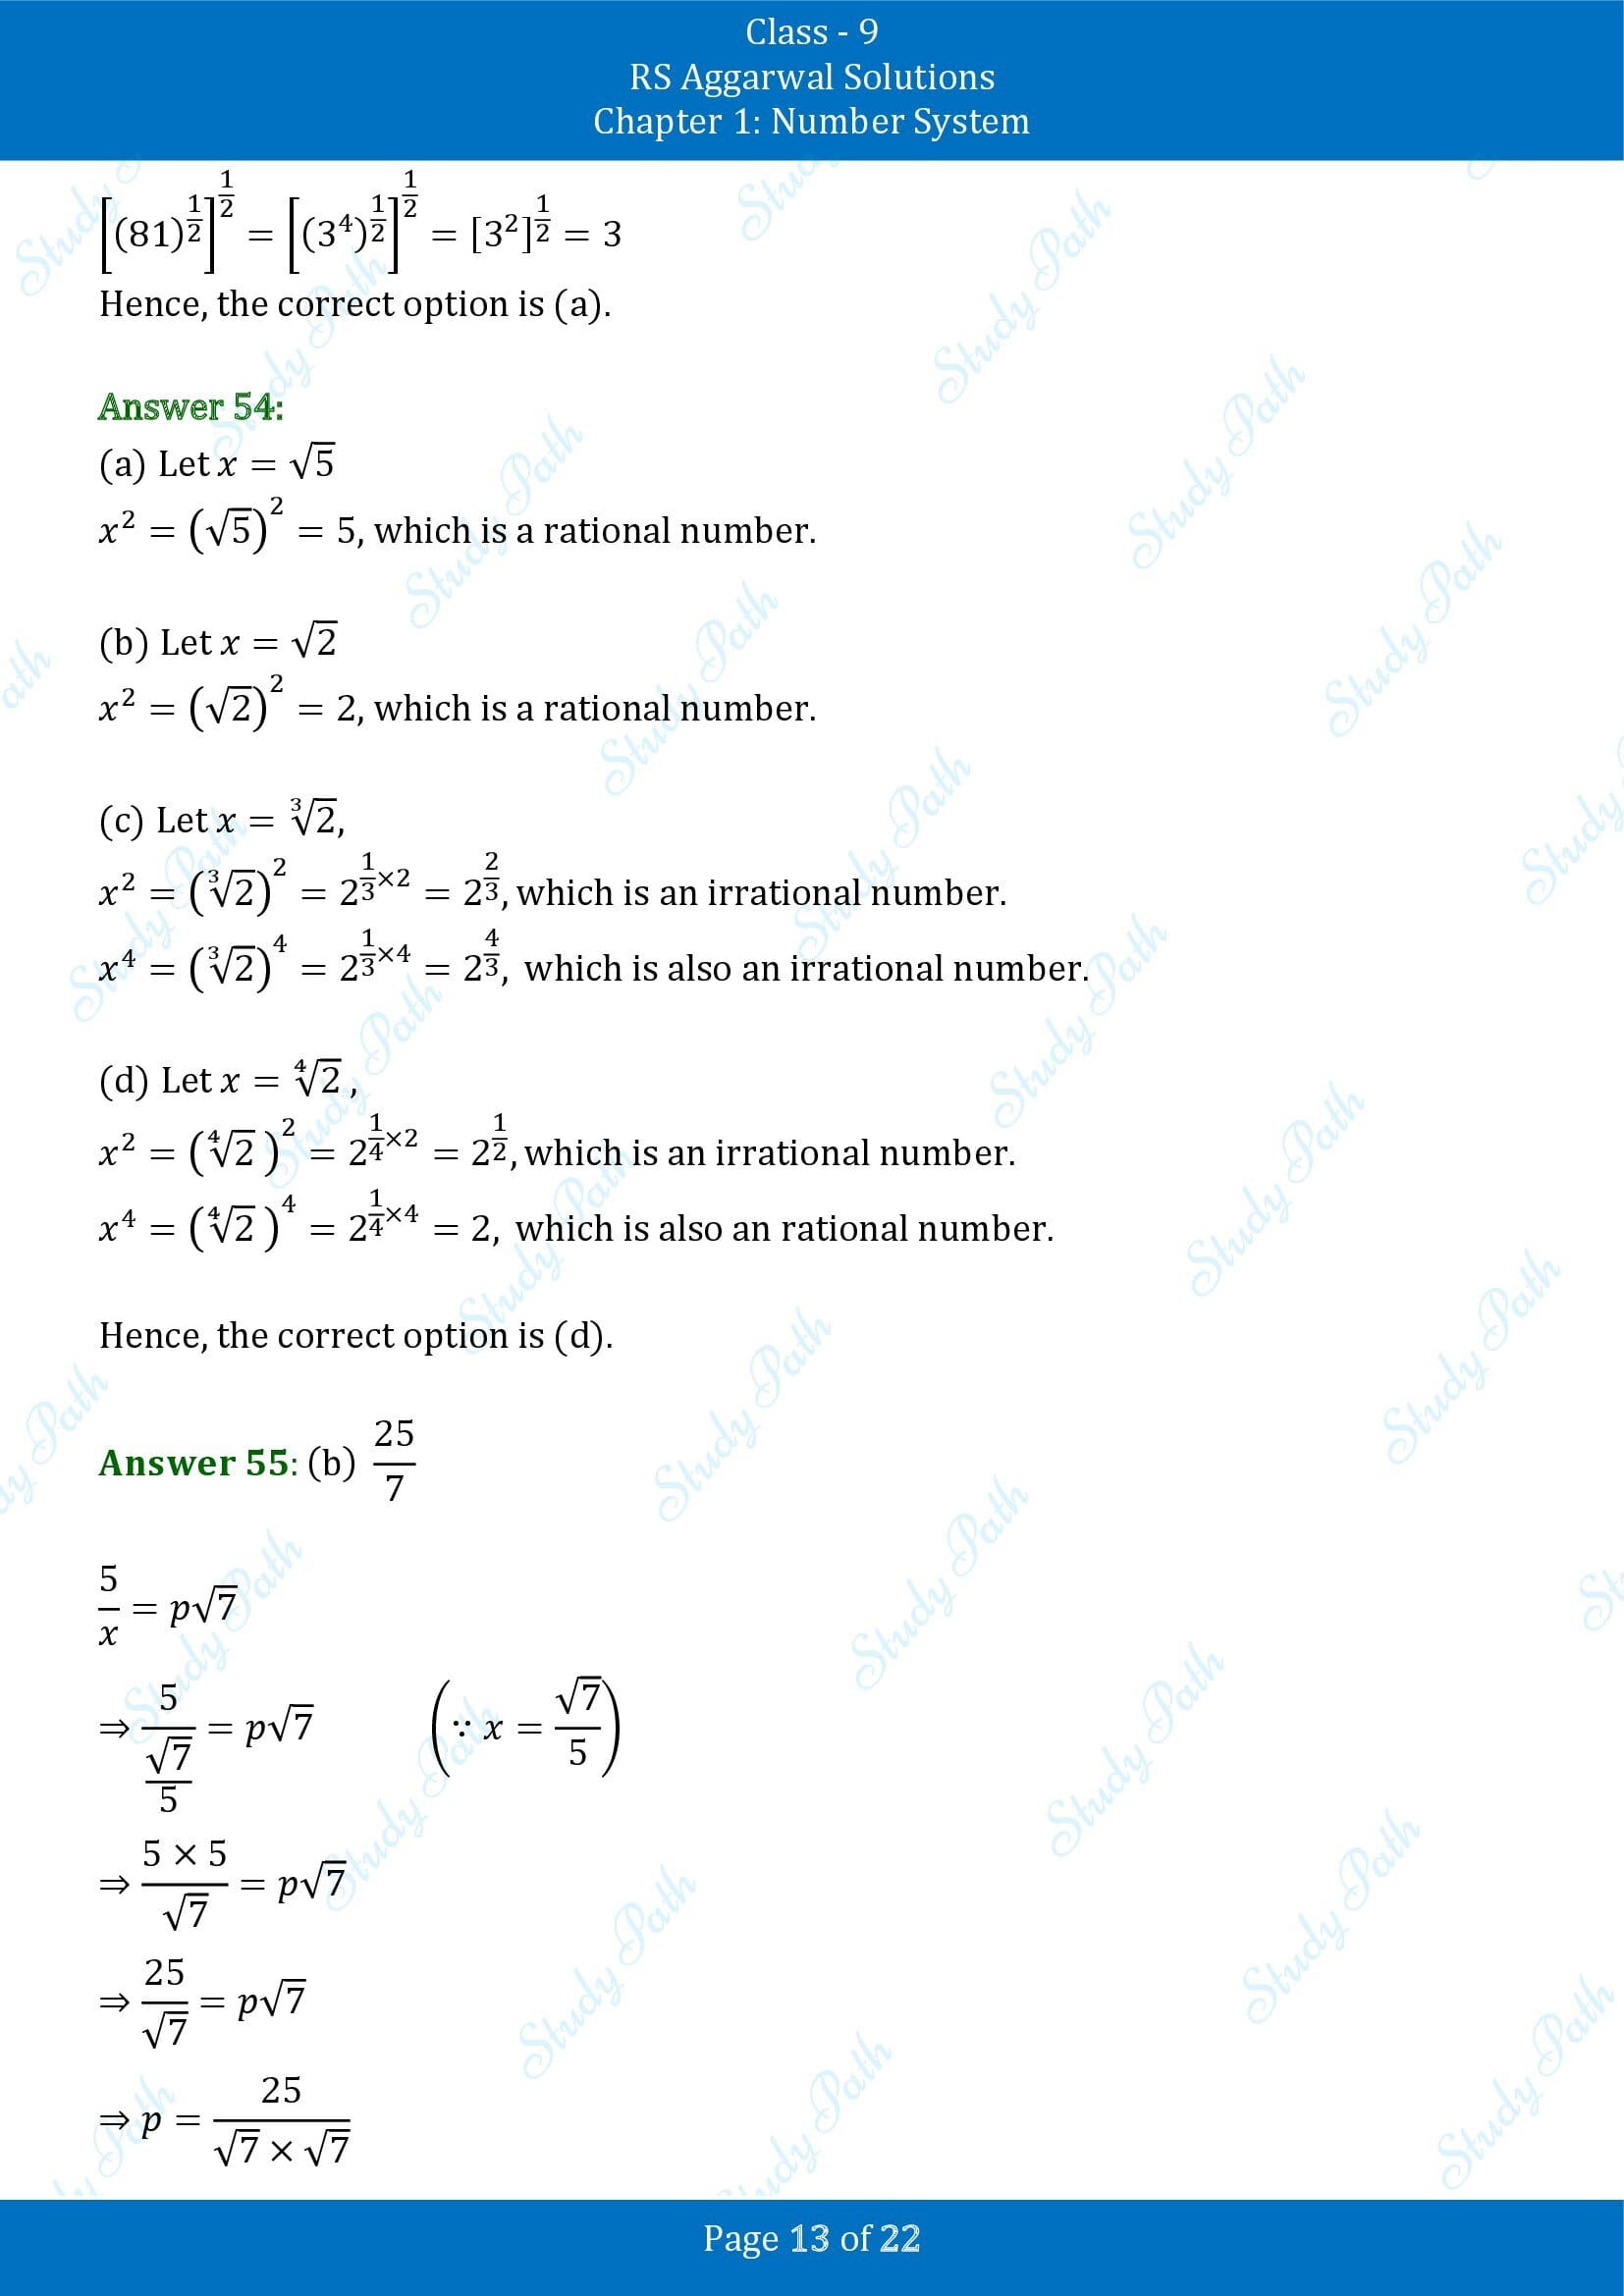 RS Aggarwal Solutions Class 9 Chapter 1 Number System Multiple Choice Questions MCQs 00013